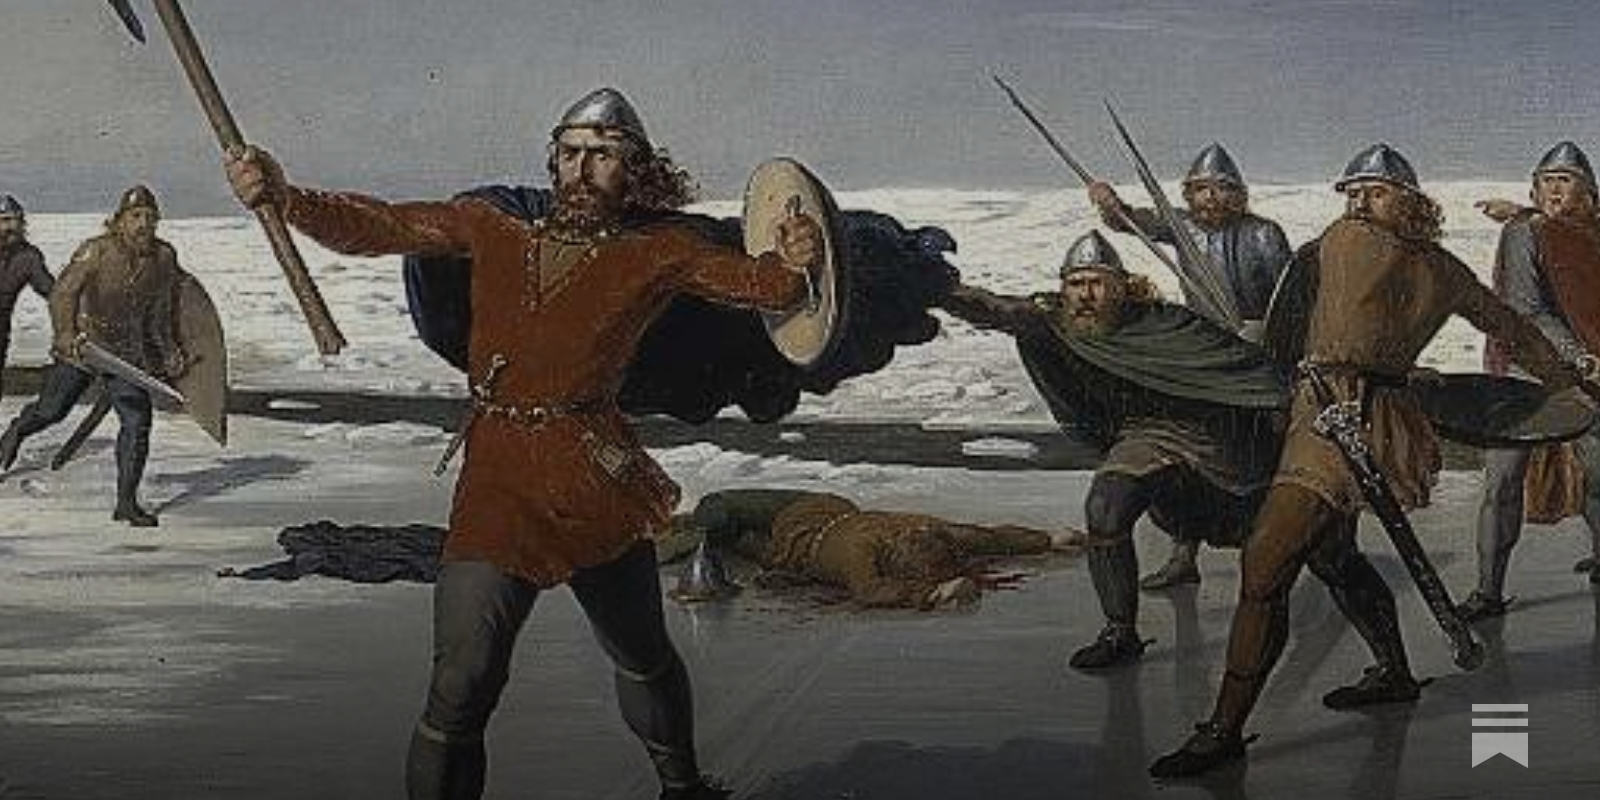 Are Anarcho-Capitalists Insane? Medieval Icelandic Conflict